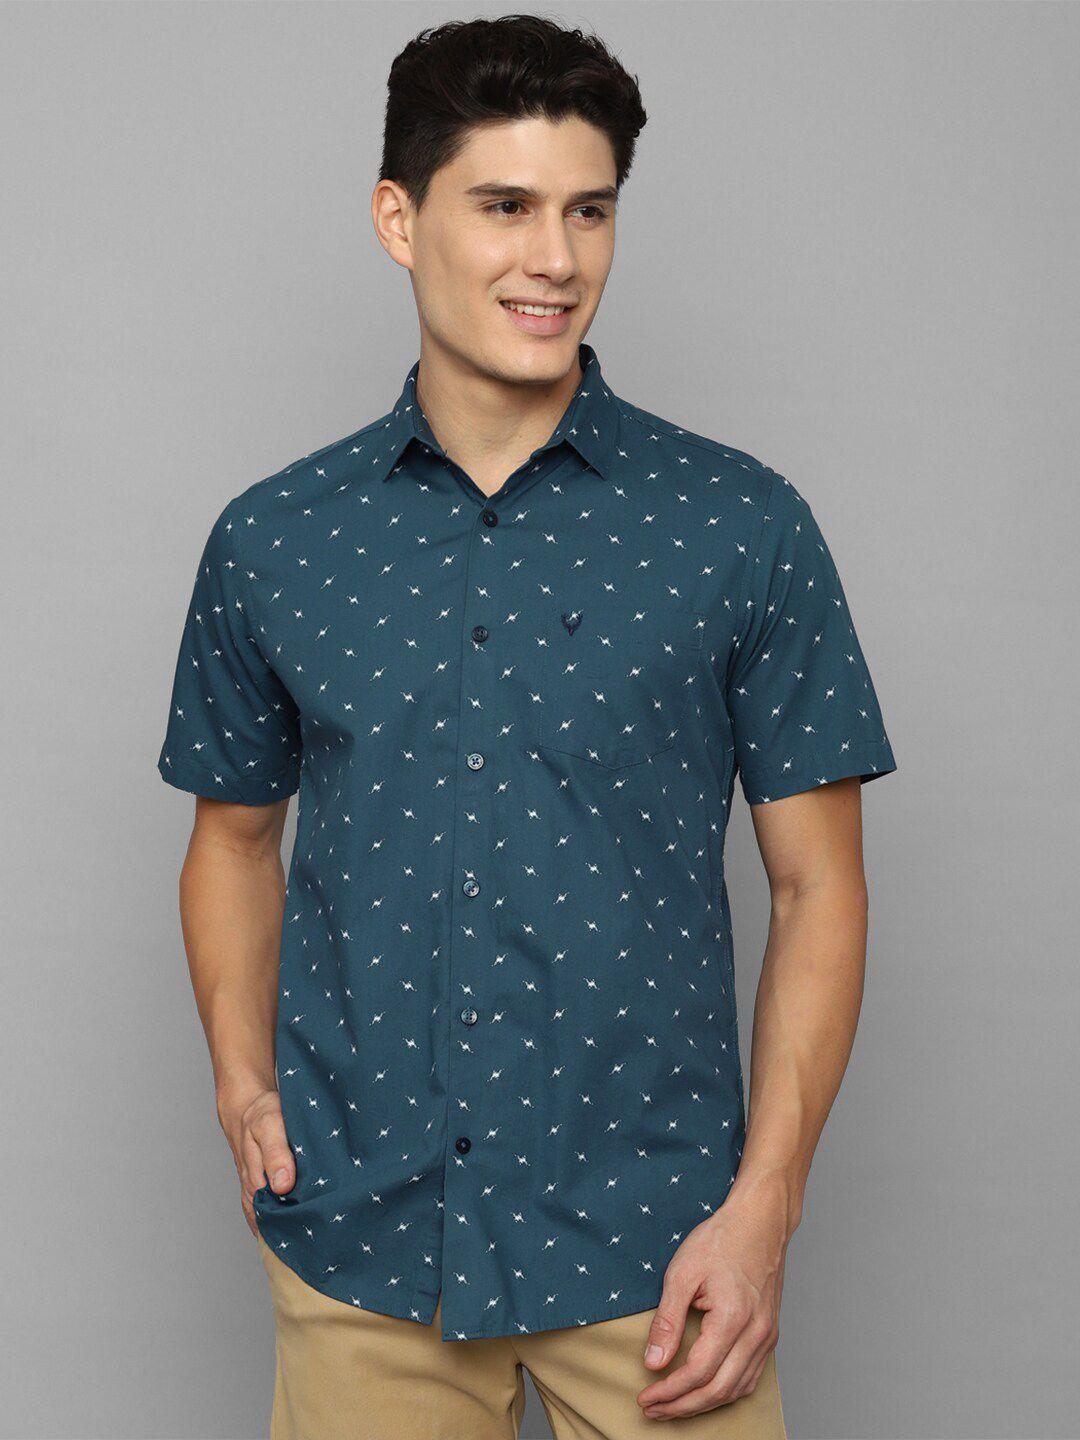 allen-solly-men-slim-fit-micro-ditsy-printed-casual-cotton-shirt